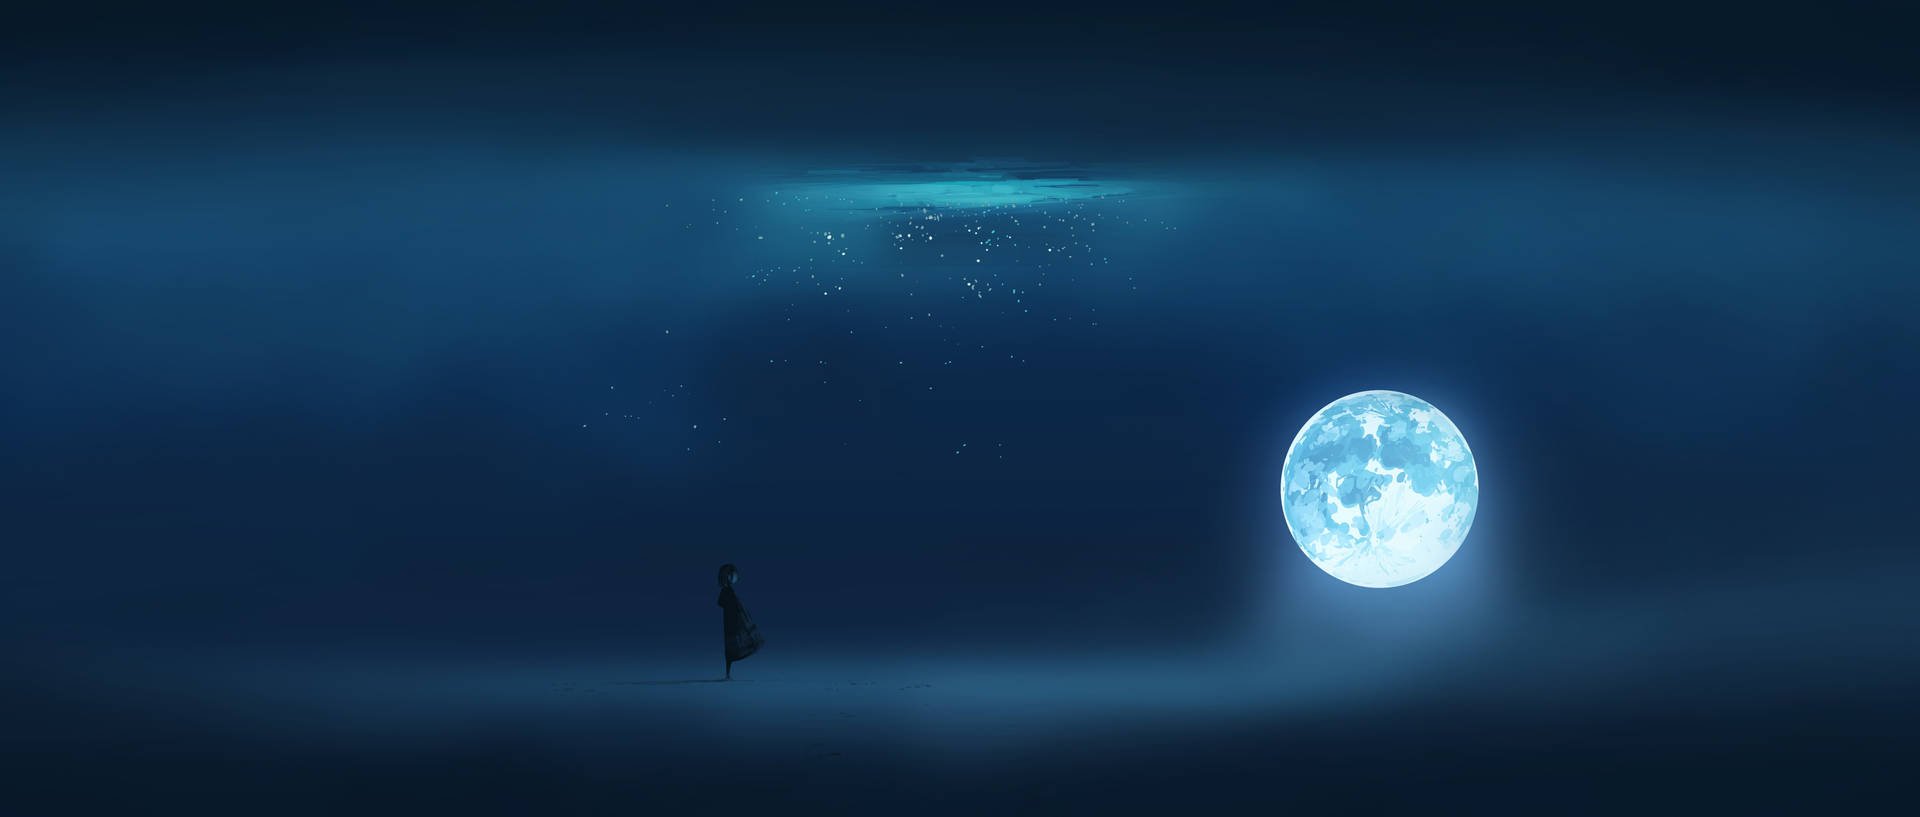 Blue 4k Sea And Moon Art Background